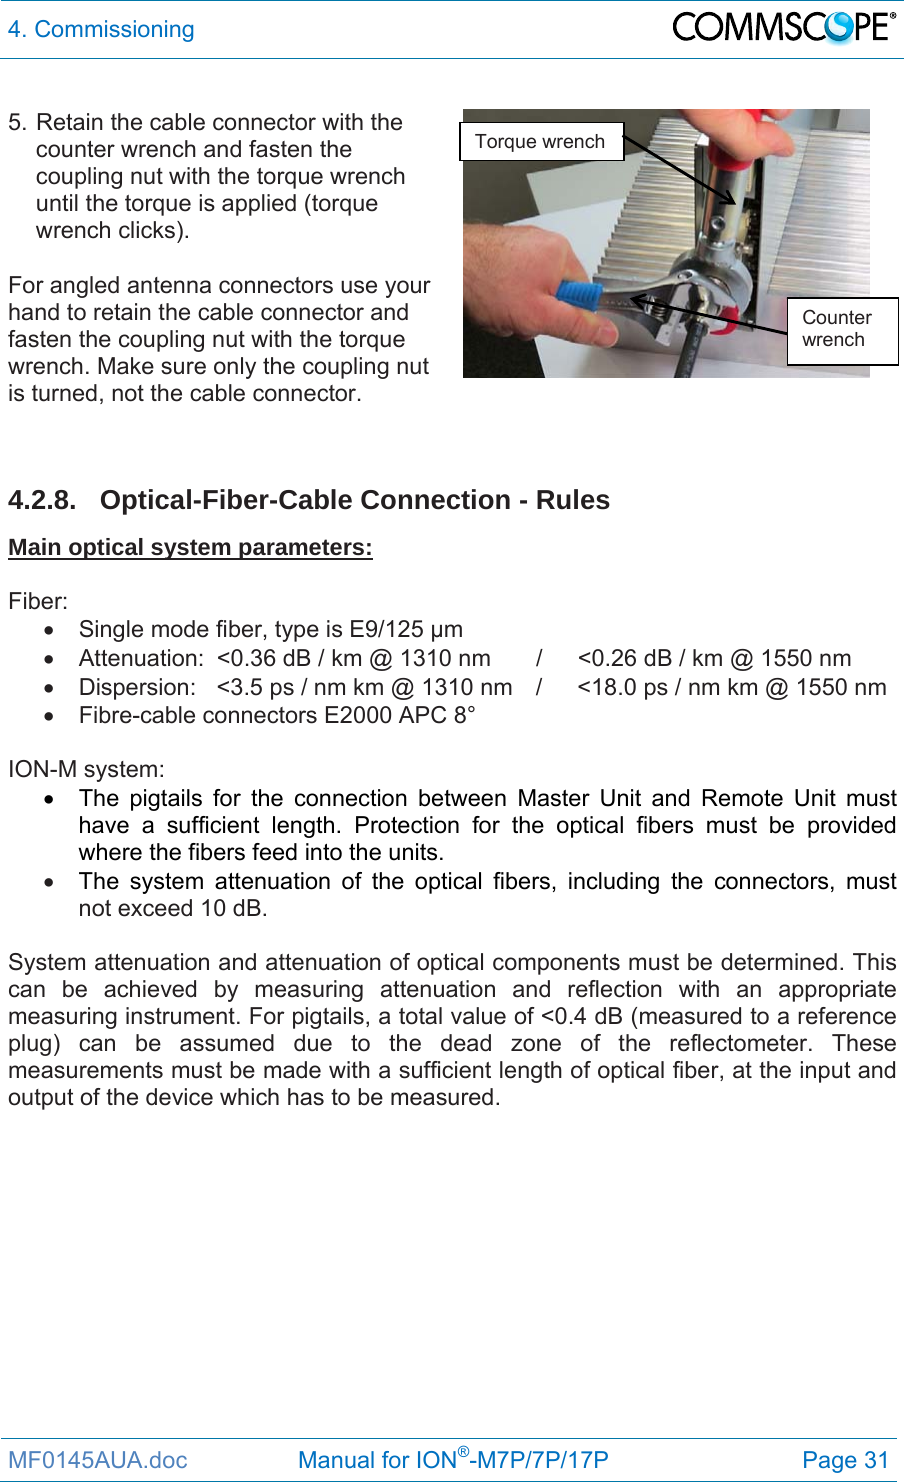 4. Commissioning  MF0145AUA.doc                 Manual for ION®-M7P/7P/17P Page 31  5. Retain the cable connector with the counter wrench and fasten the coupling nut with the torque wrench until the torque is applied (torque wrench clicks).  For angled antenna connectors use your hand to retain the cable connector and fasten the coupling nut with the torque wrench. Make sure only the coupling nut is turned, not the cable connector.     4.2.8. Optical-Fiber-Cable Connection - Rules Main optical system parameters:  Fiber:   Single mode fiber, type is E9/125 µm   Attenuation:  &lt;0.36 dB / km @ 1310 nm  /  &lt;0.26 dB / km @ 1550 nm   Dispersion:  &lt;3.5 ps / nm km @ 1310 nm  /  &lt;18.0 ps / nm km @ 1550 nm   Fibre-cable connectors E2000 APC 8°  ION-M system:   The pigtails for the connection between Master Unit and Remote Unit must have a sufficient length. Protection for the optical fibers must be provided where the fibers feed into the units.   The system attenuation of the optical fibers, including the connectors, must not exceed 10 dB.  System attenuation and attenuation of optical components must be determined. This can be achieved by measuring attenuation and reflection with an appropriate measuring instrument. For pigtails, a total value of &lt;0.4 dB (measured to a reference plug) can be assumed due to the dead zone of the reflectometer. These measurements must be made with a sufficient length of optical fiber, at the input and output of the device which has to be measured.  Torque wrench Counter wrench 